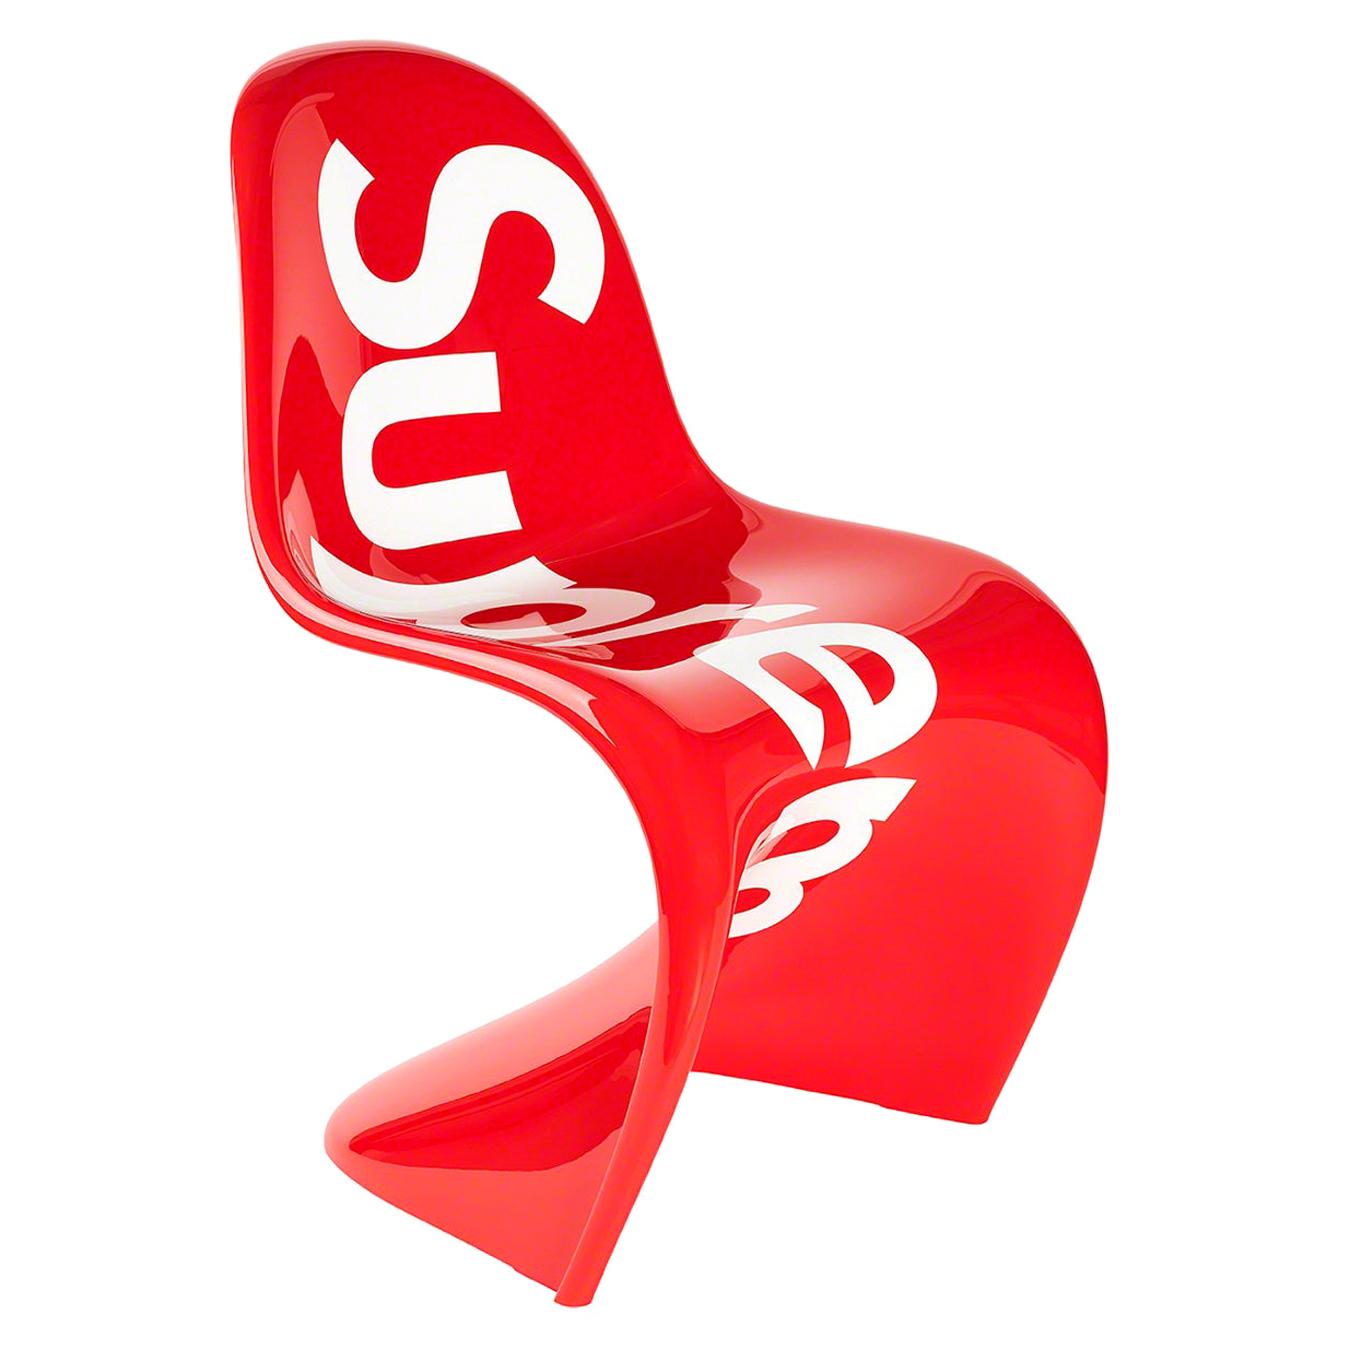 Supreme x Vitra Panton Mid-Century Modern "S Chair" in Glossy Red with Logo For Sale